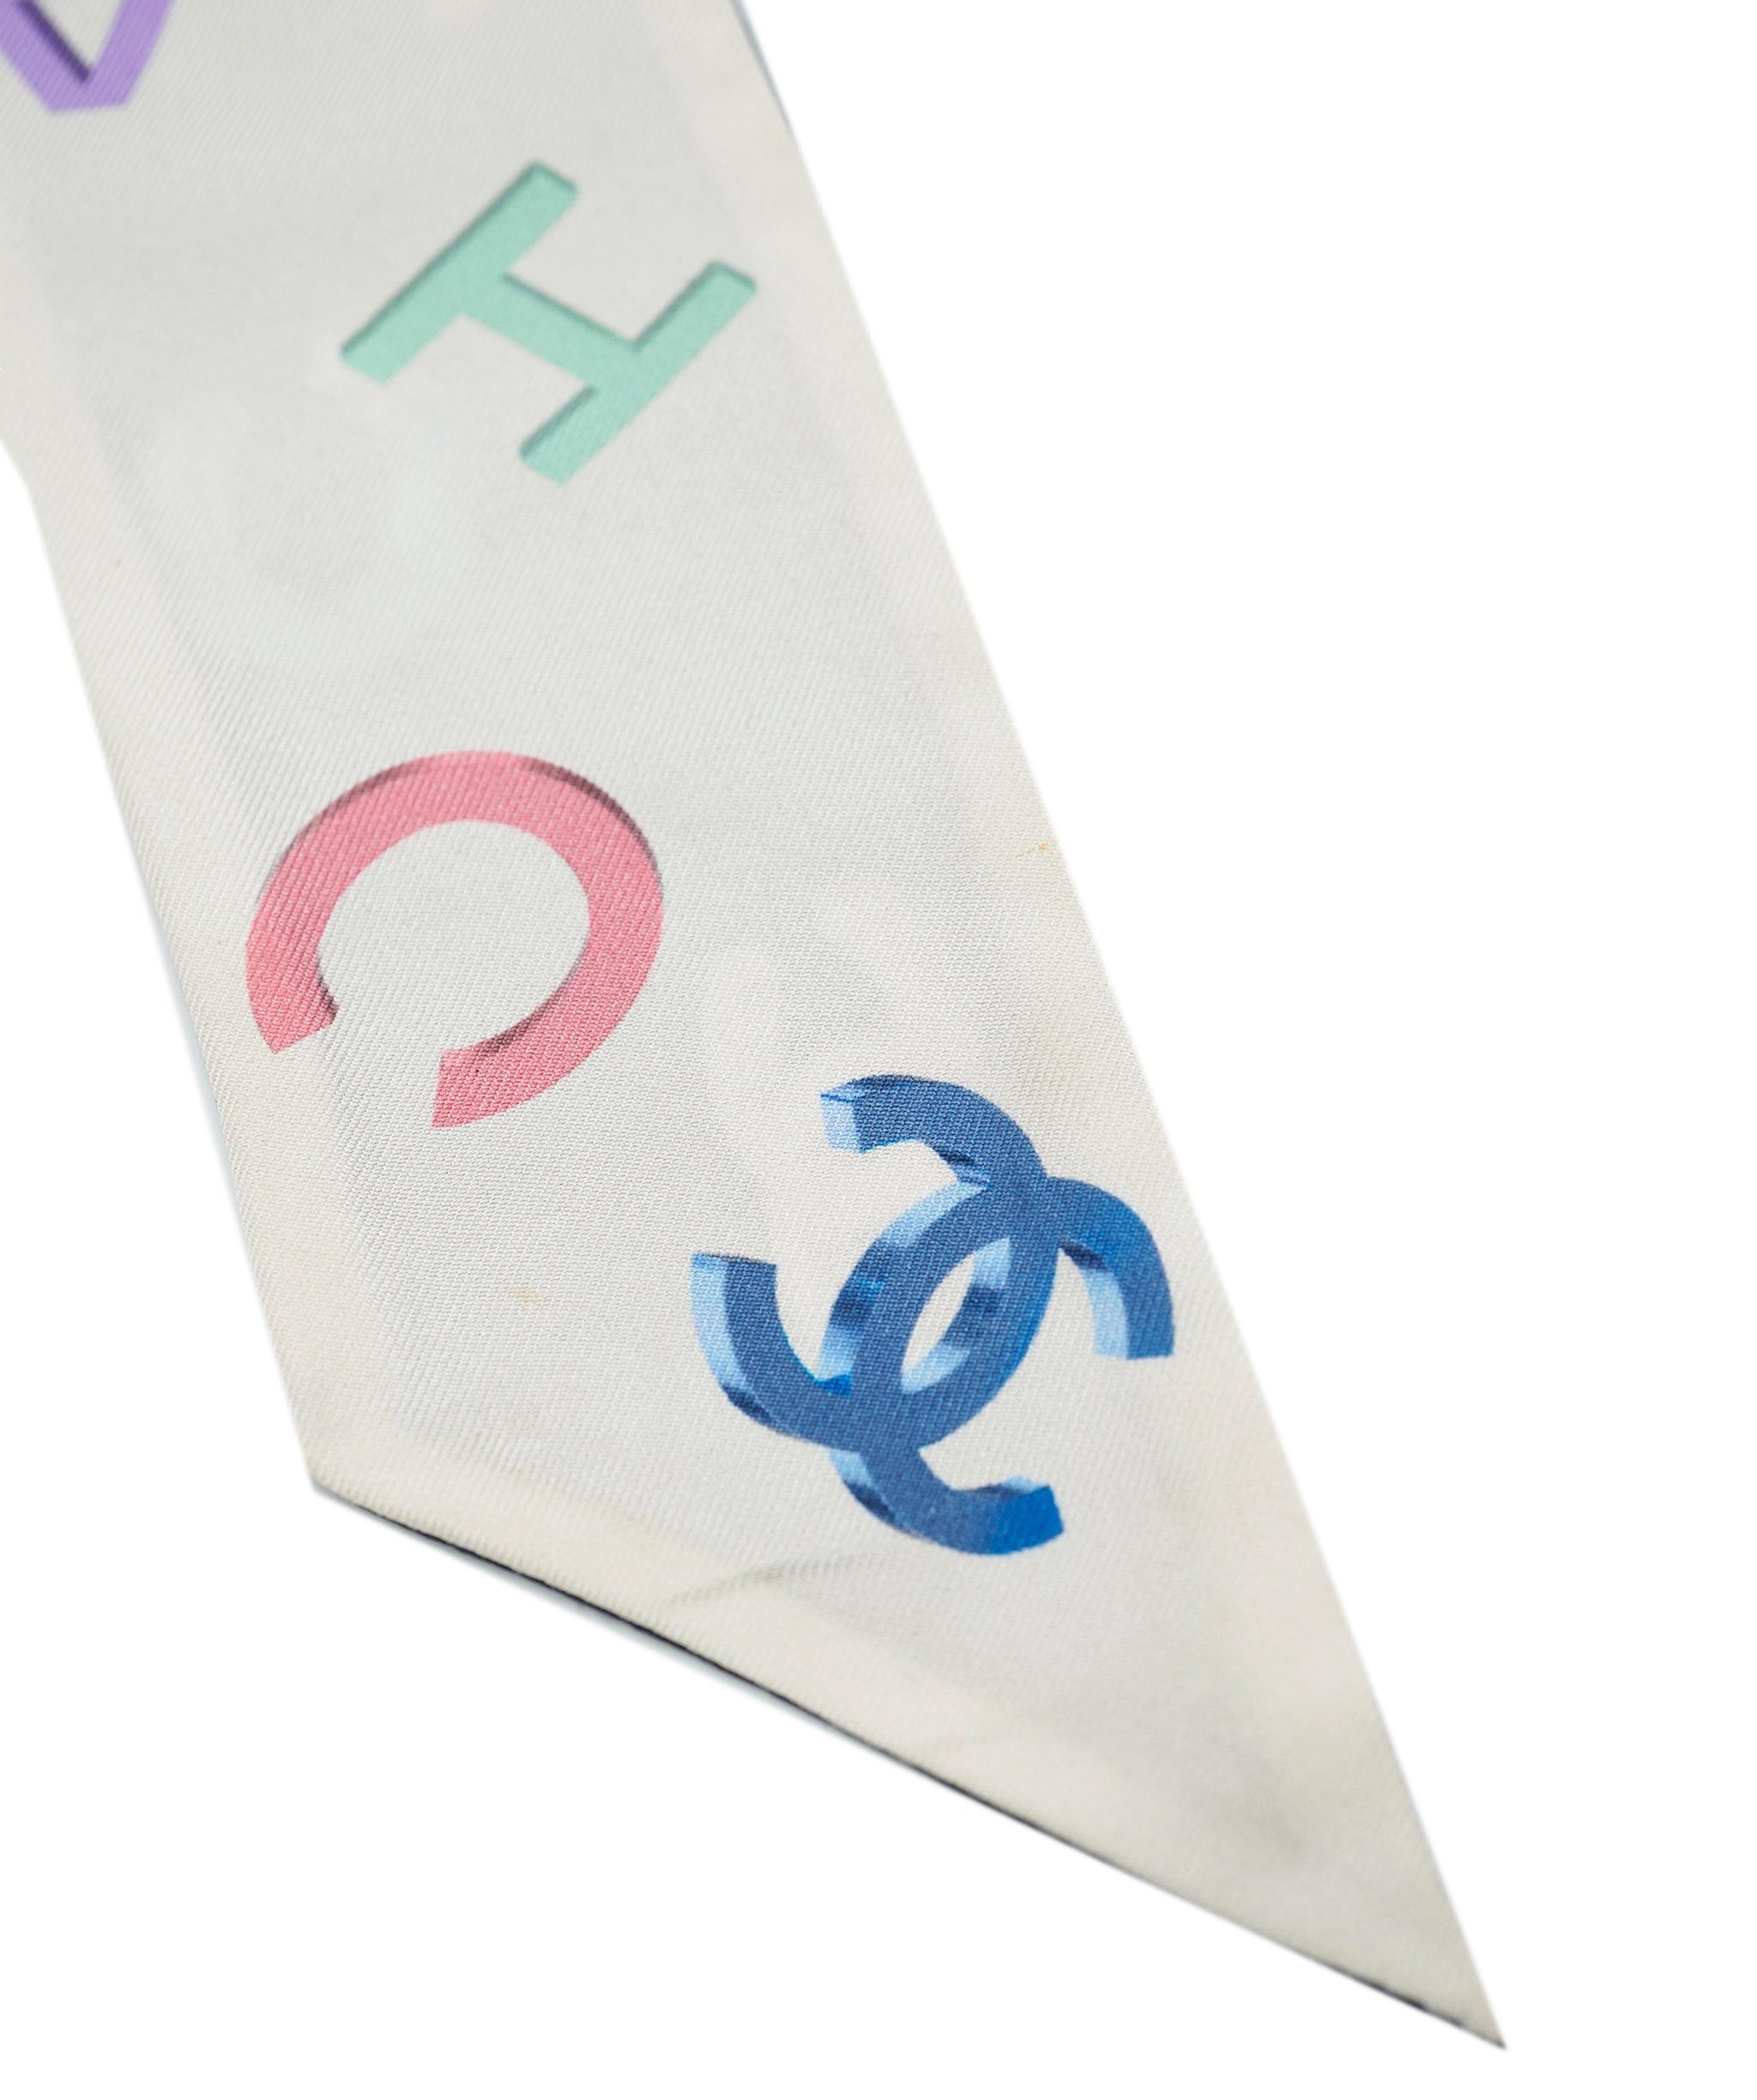 Chanel Chanel navy/white silk letters neck scarf 119cm - AJC0661